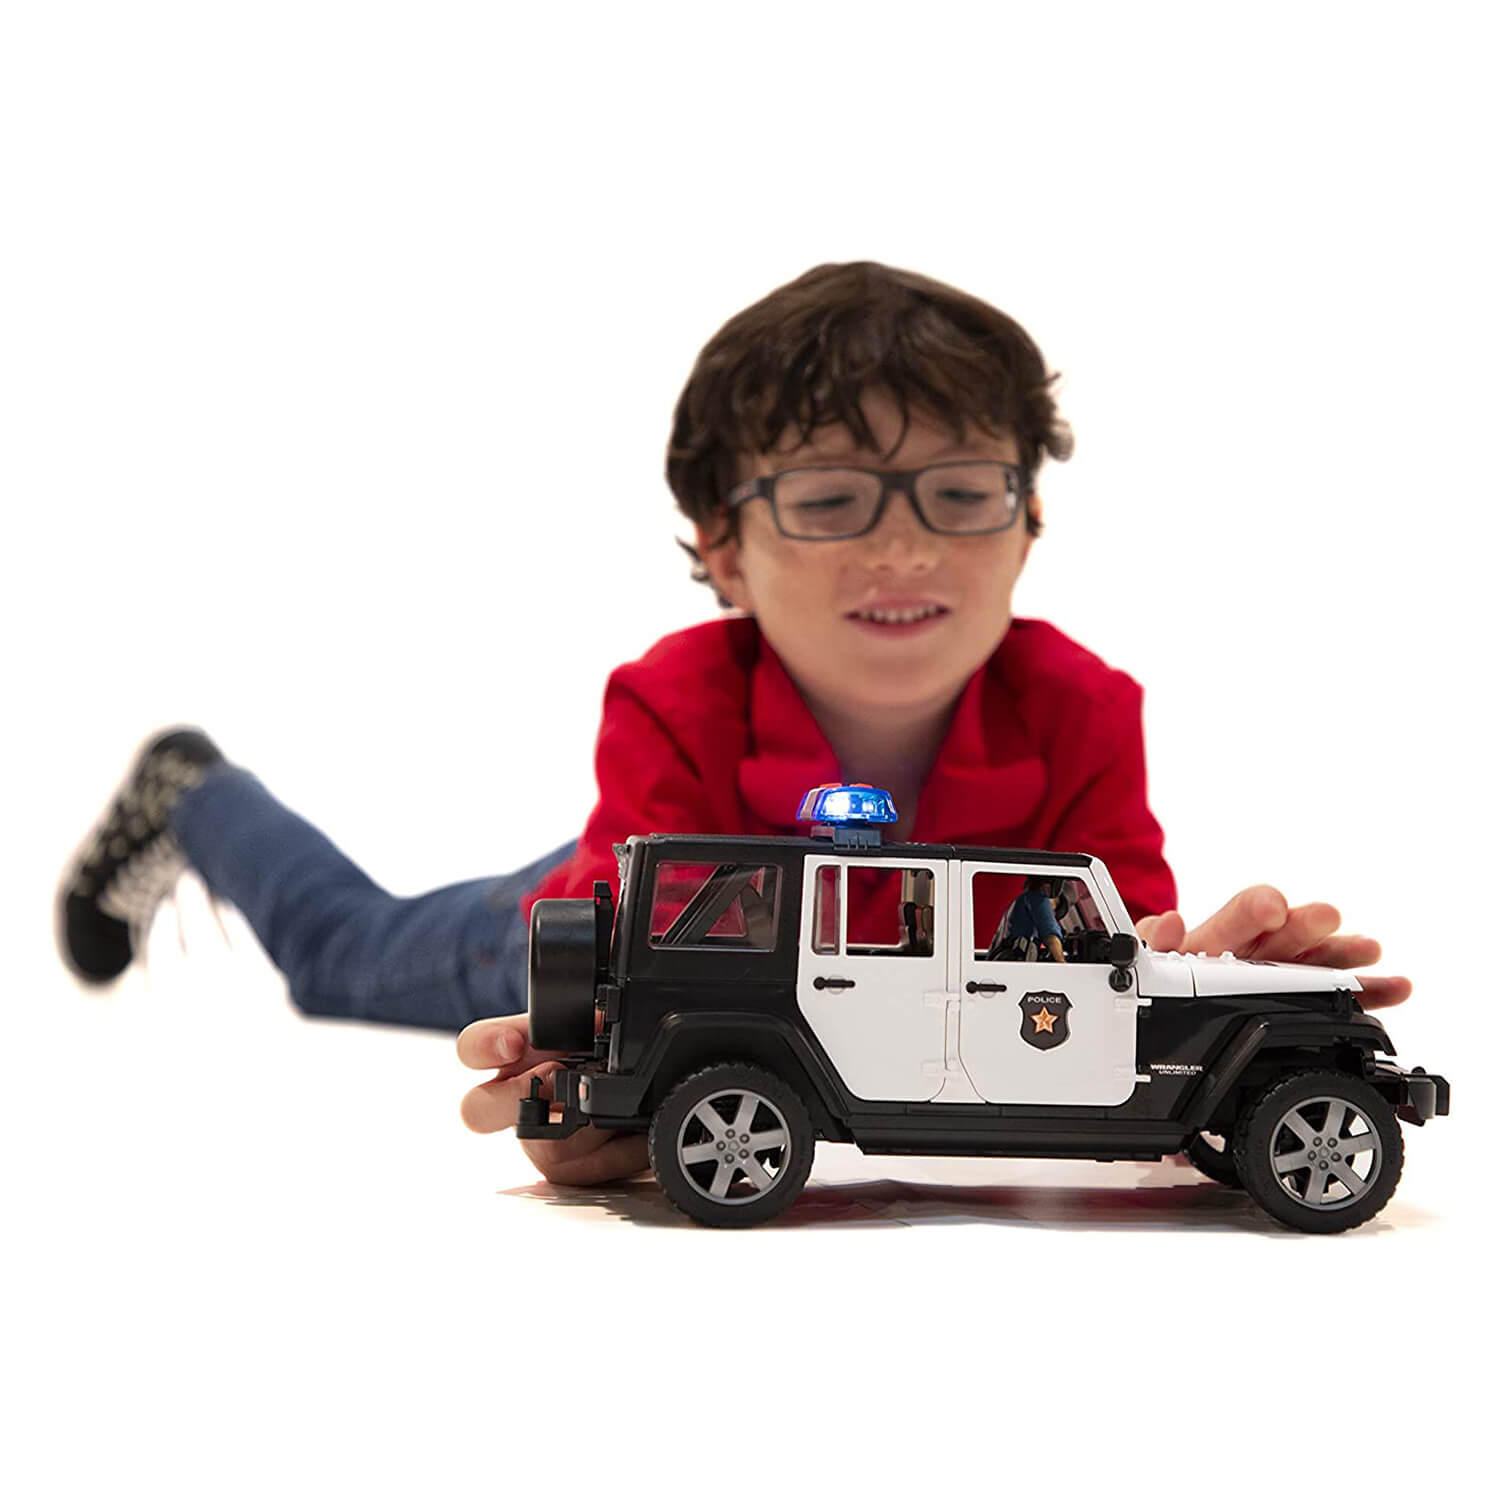 Kid playing with the police jeep toy.